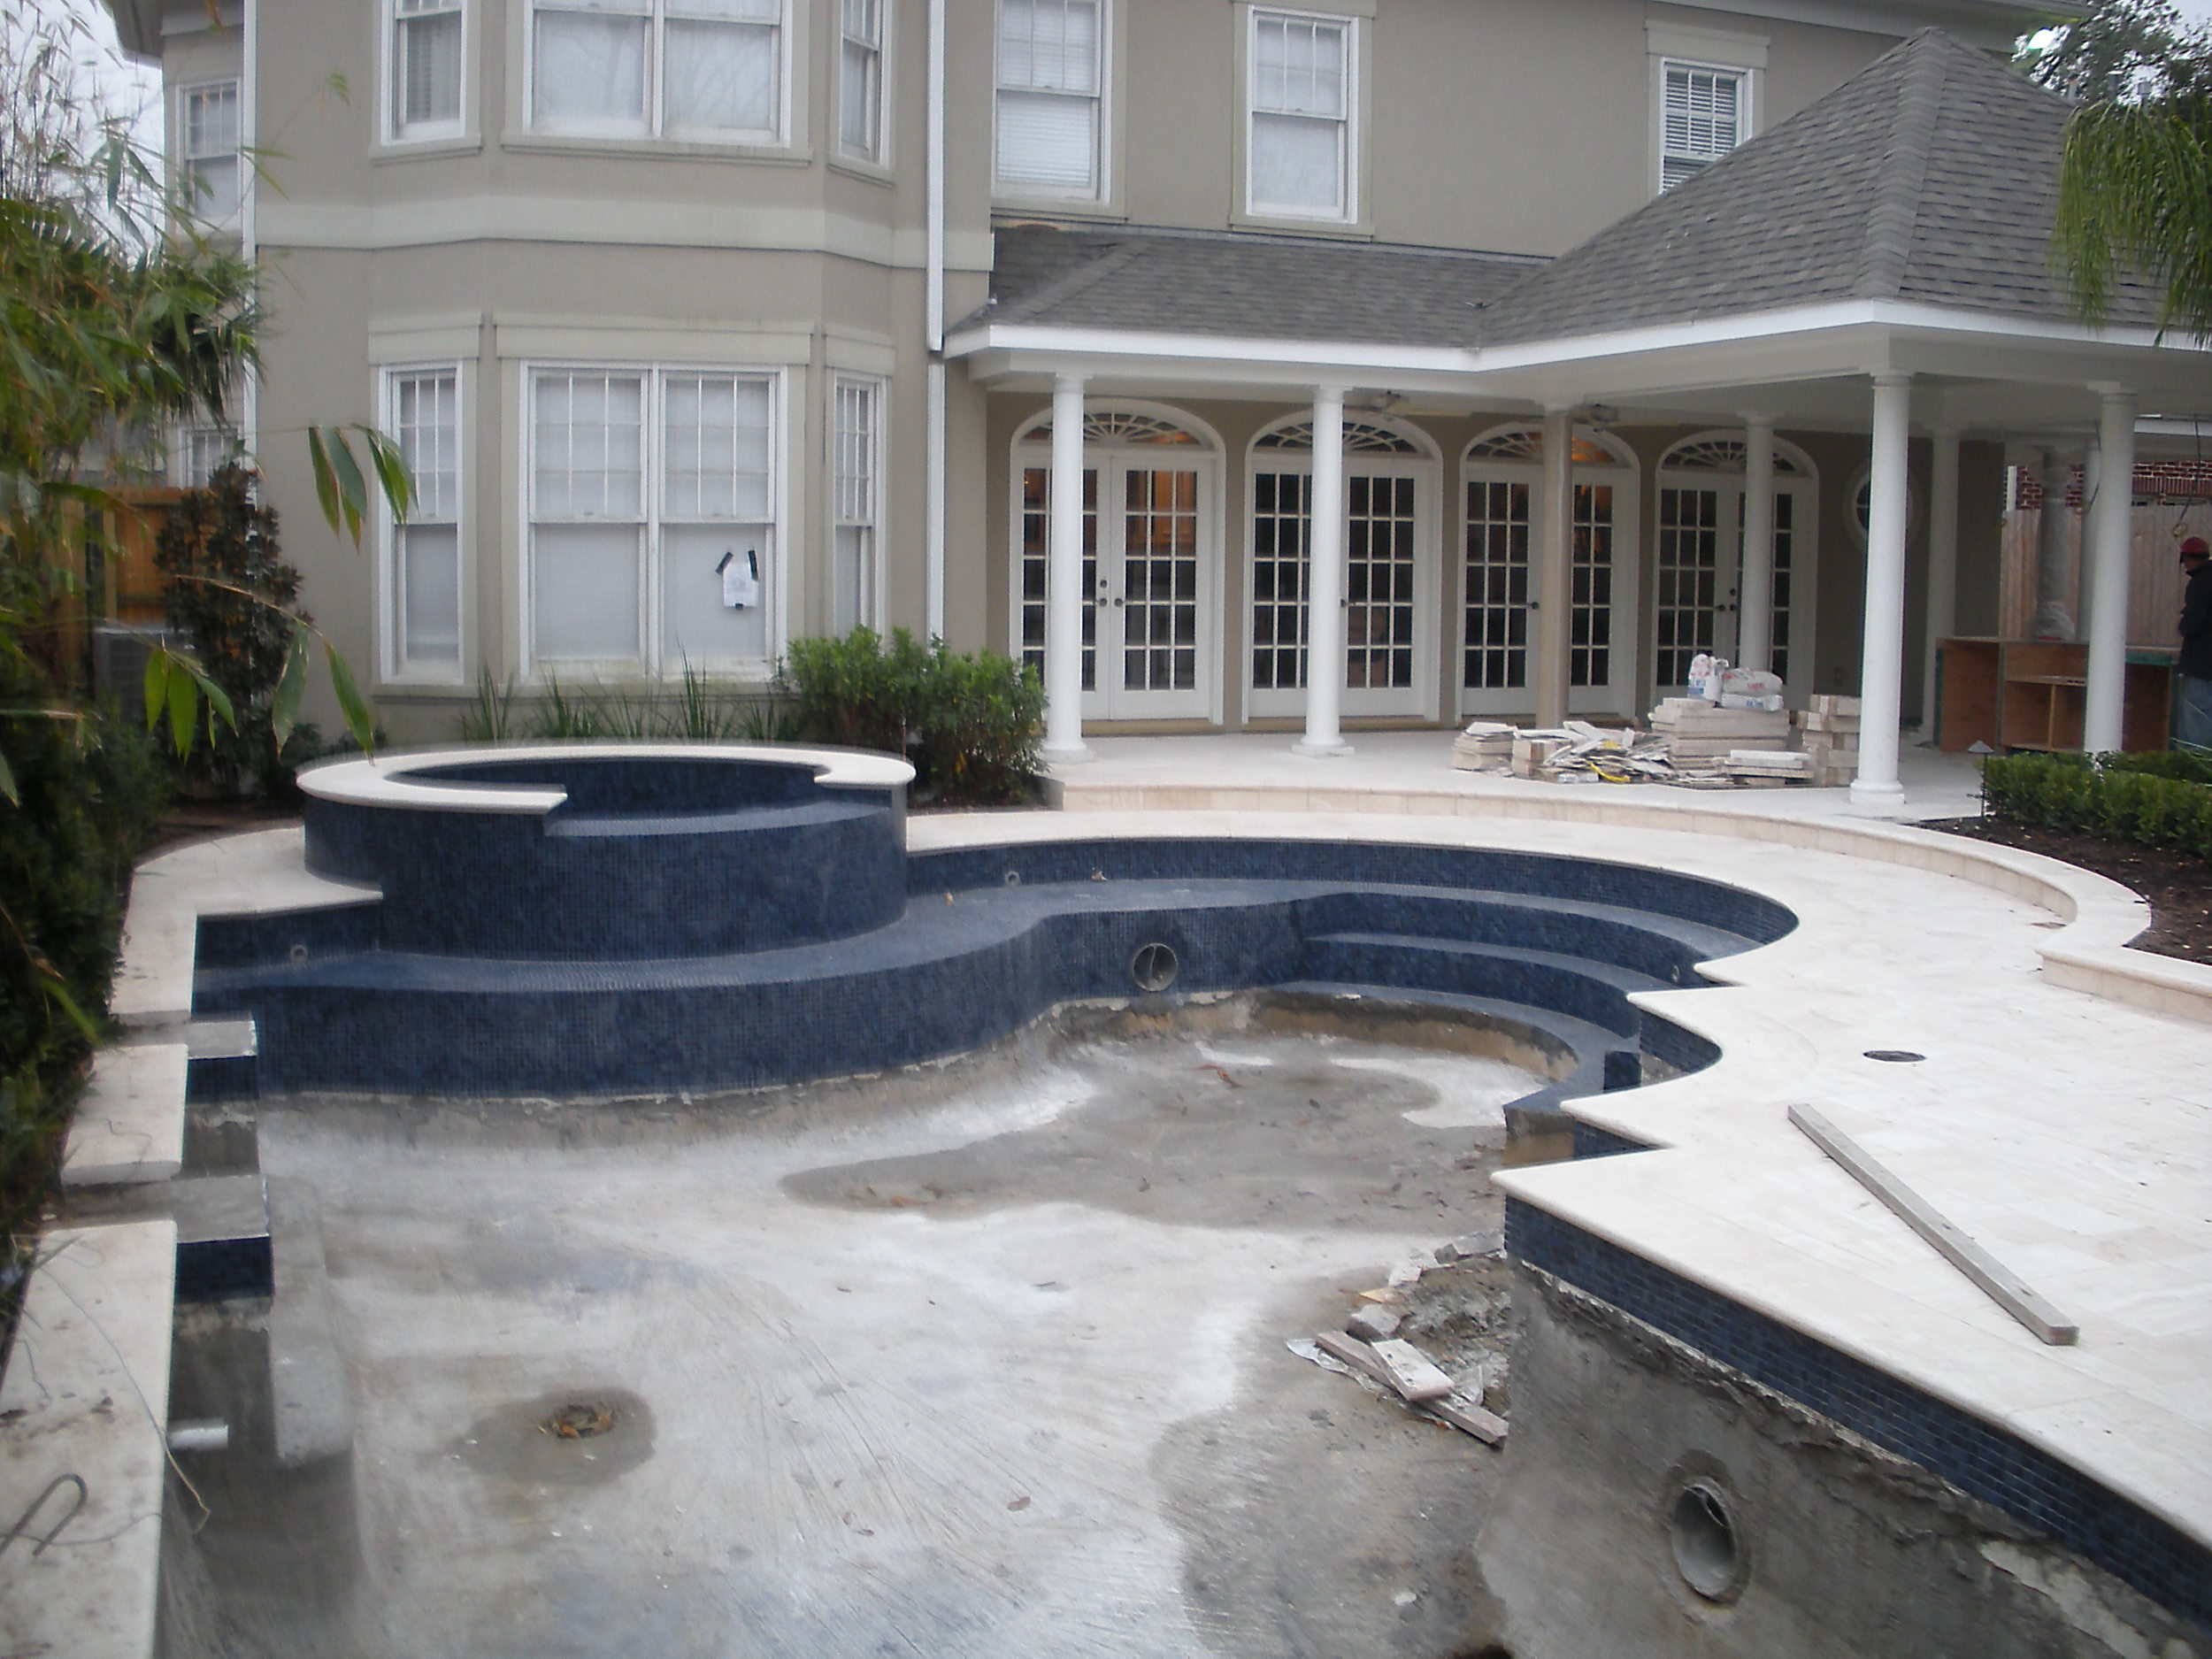 Stone pool decking, coping and water line tile